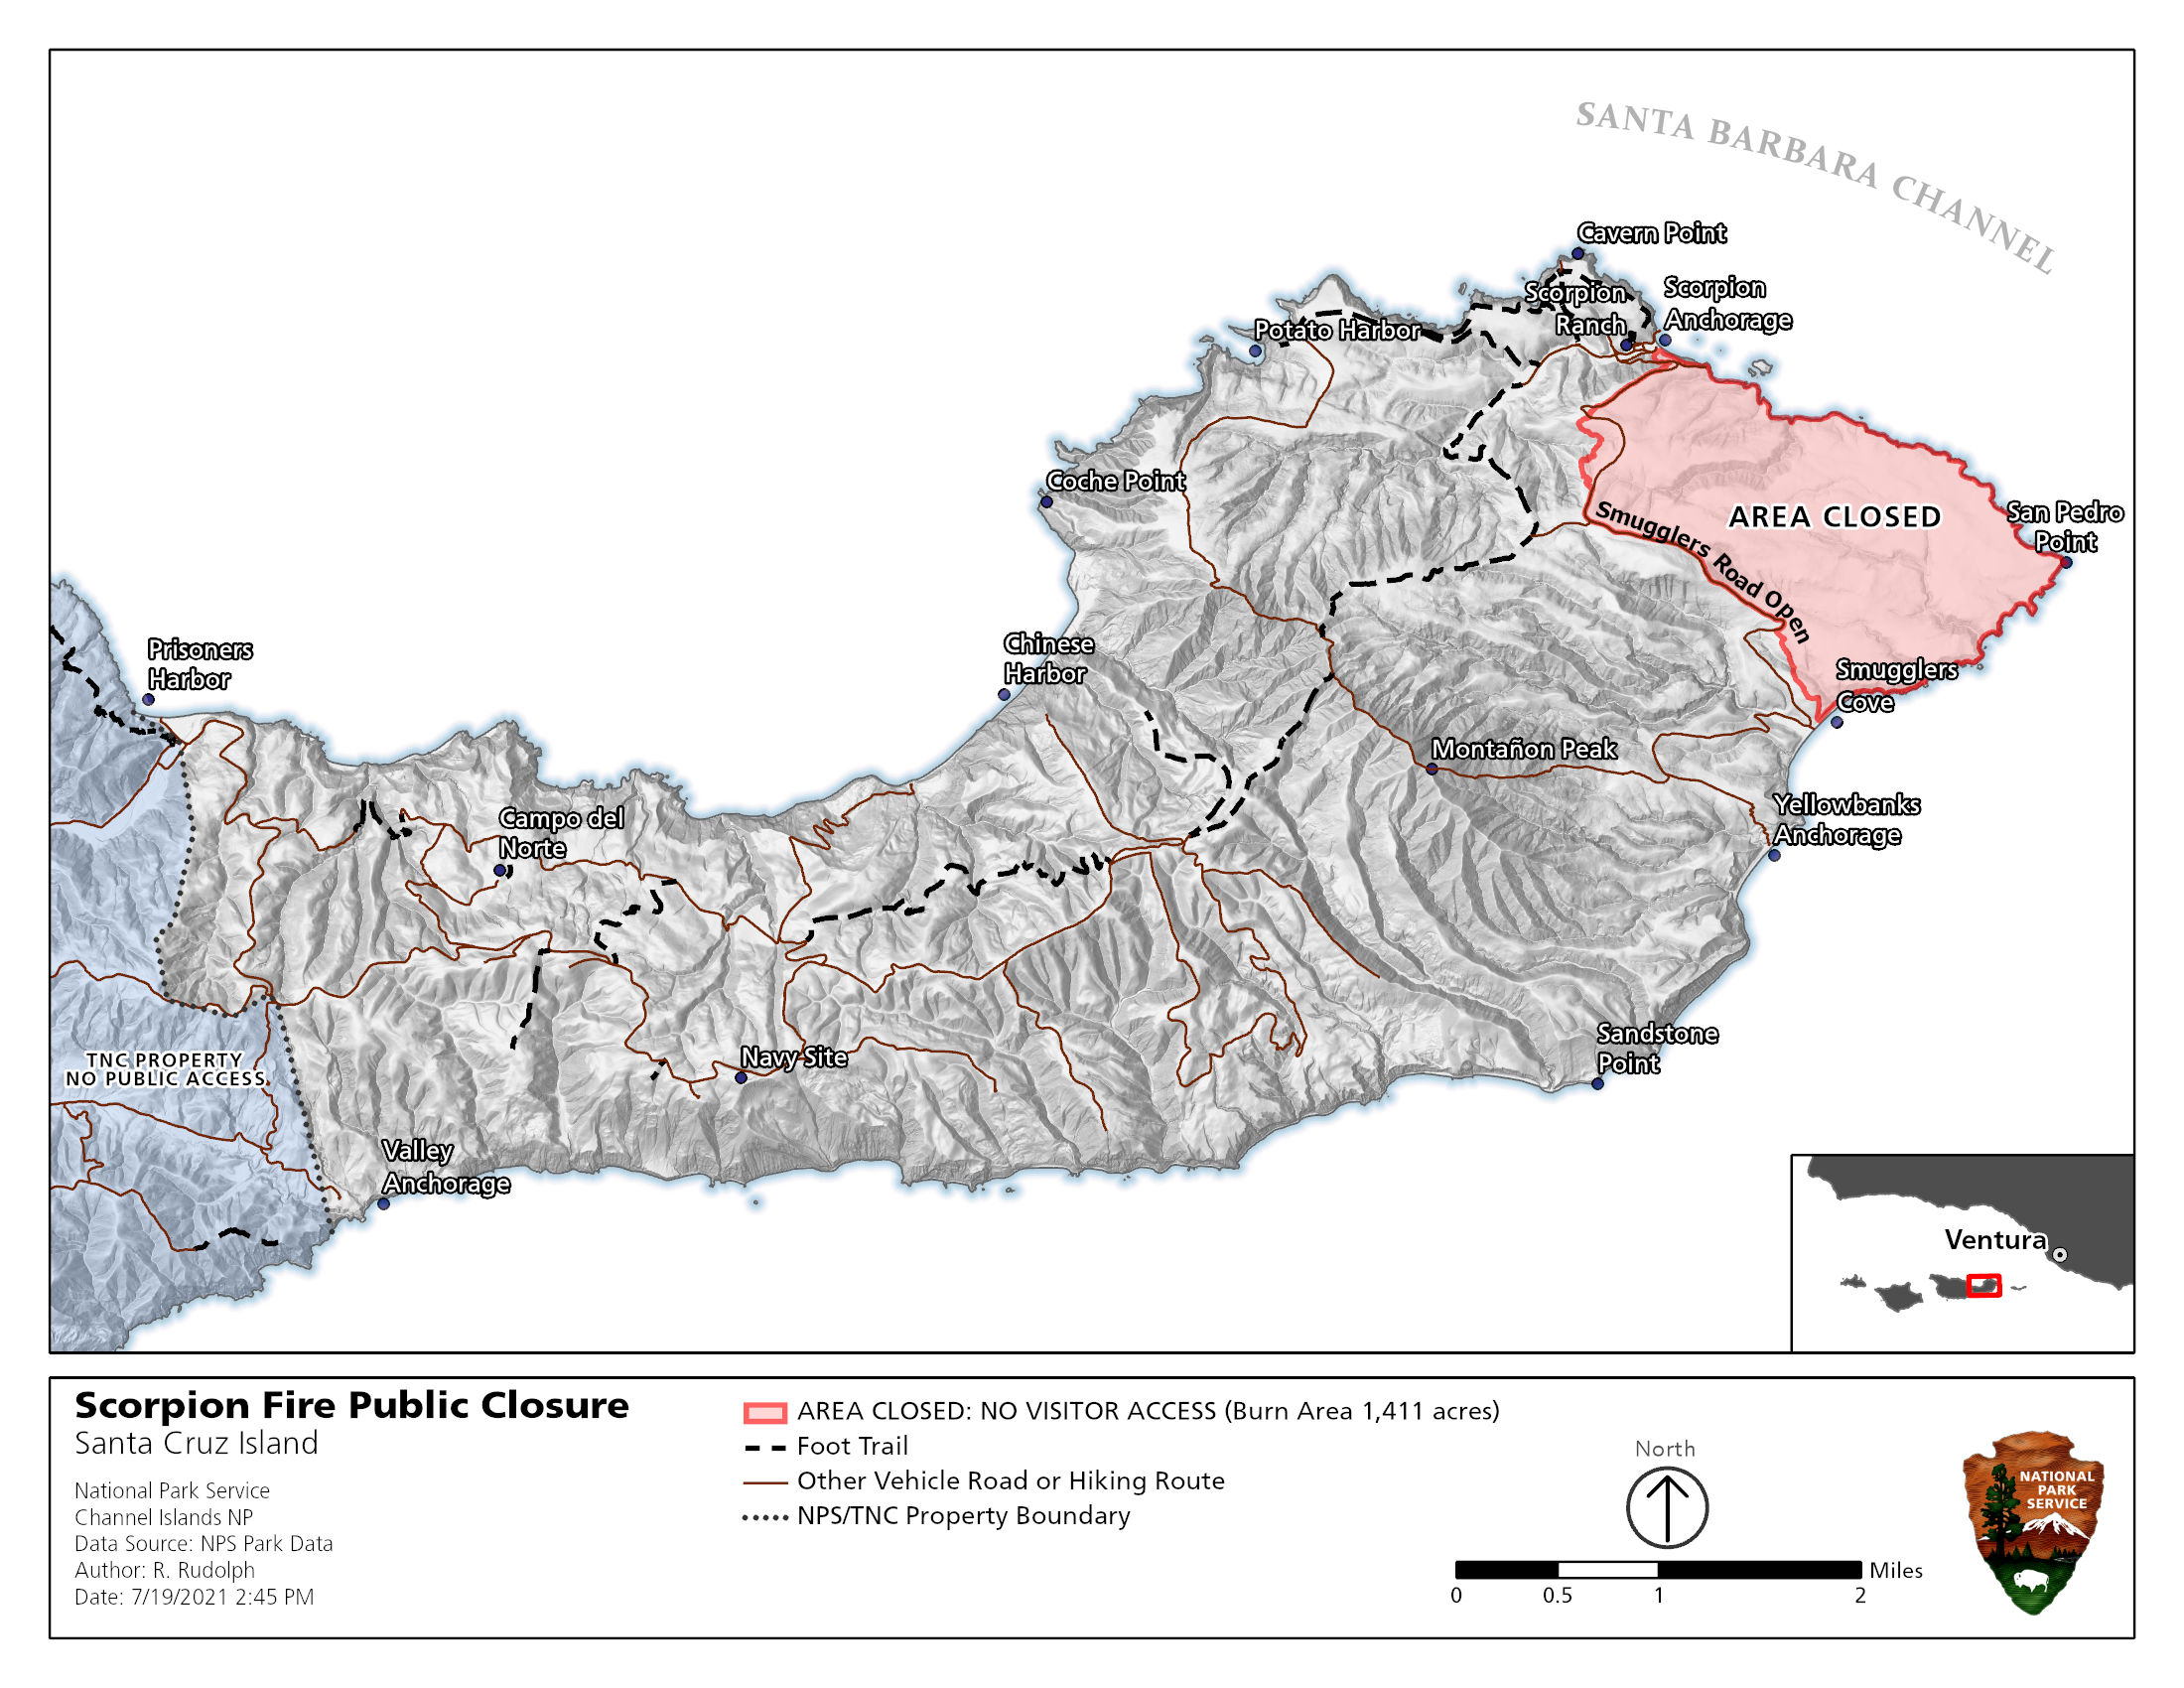 map of santa cruz island with roads and trails and fire burn area on right side of island